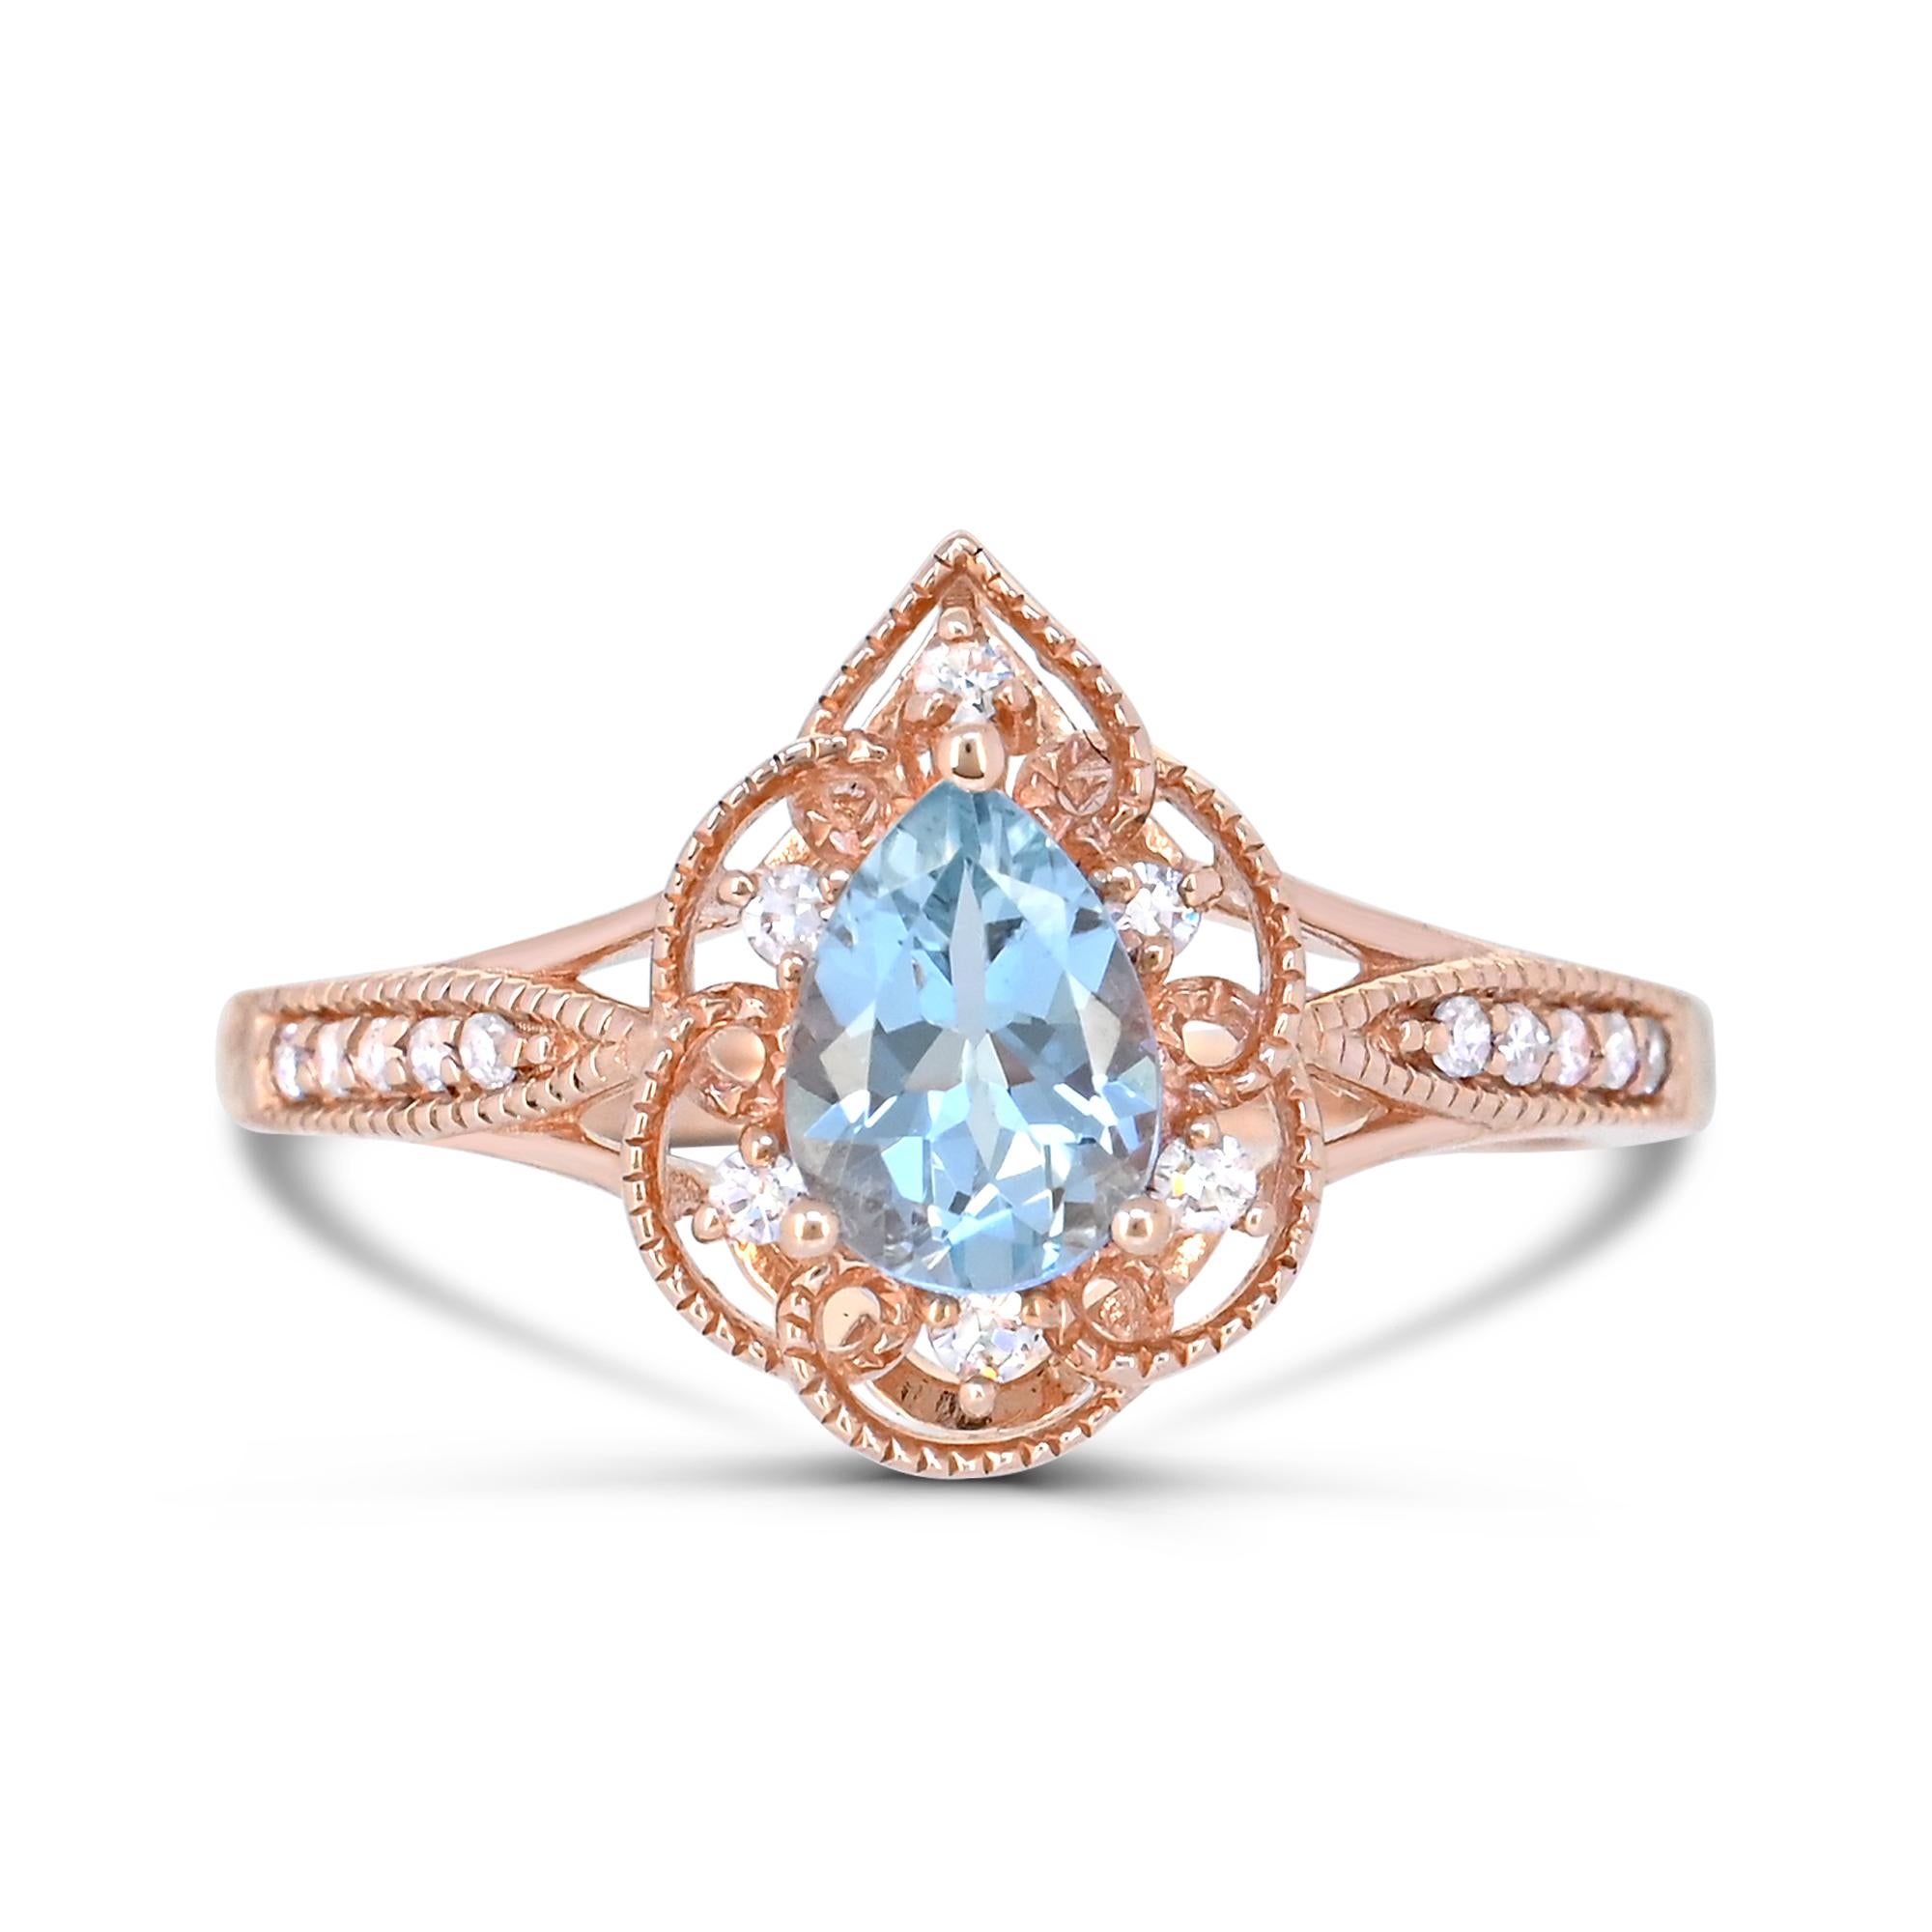 Indulge in the elegance of our 1-3/4 Carat Aquamarine and Diamond Accent 14K Rose Gold Ring. Crafted with meticulous attention to detail, this ring boasts a stunning combination of one pear-cut aquamarine accented by sparkling round A-quality white